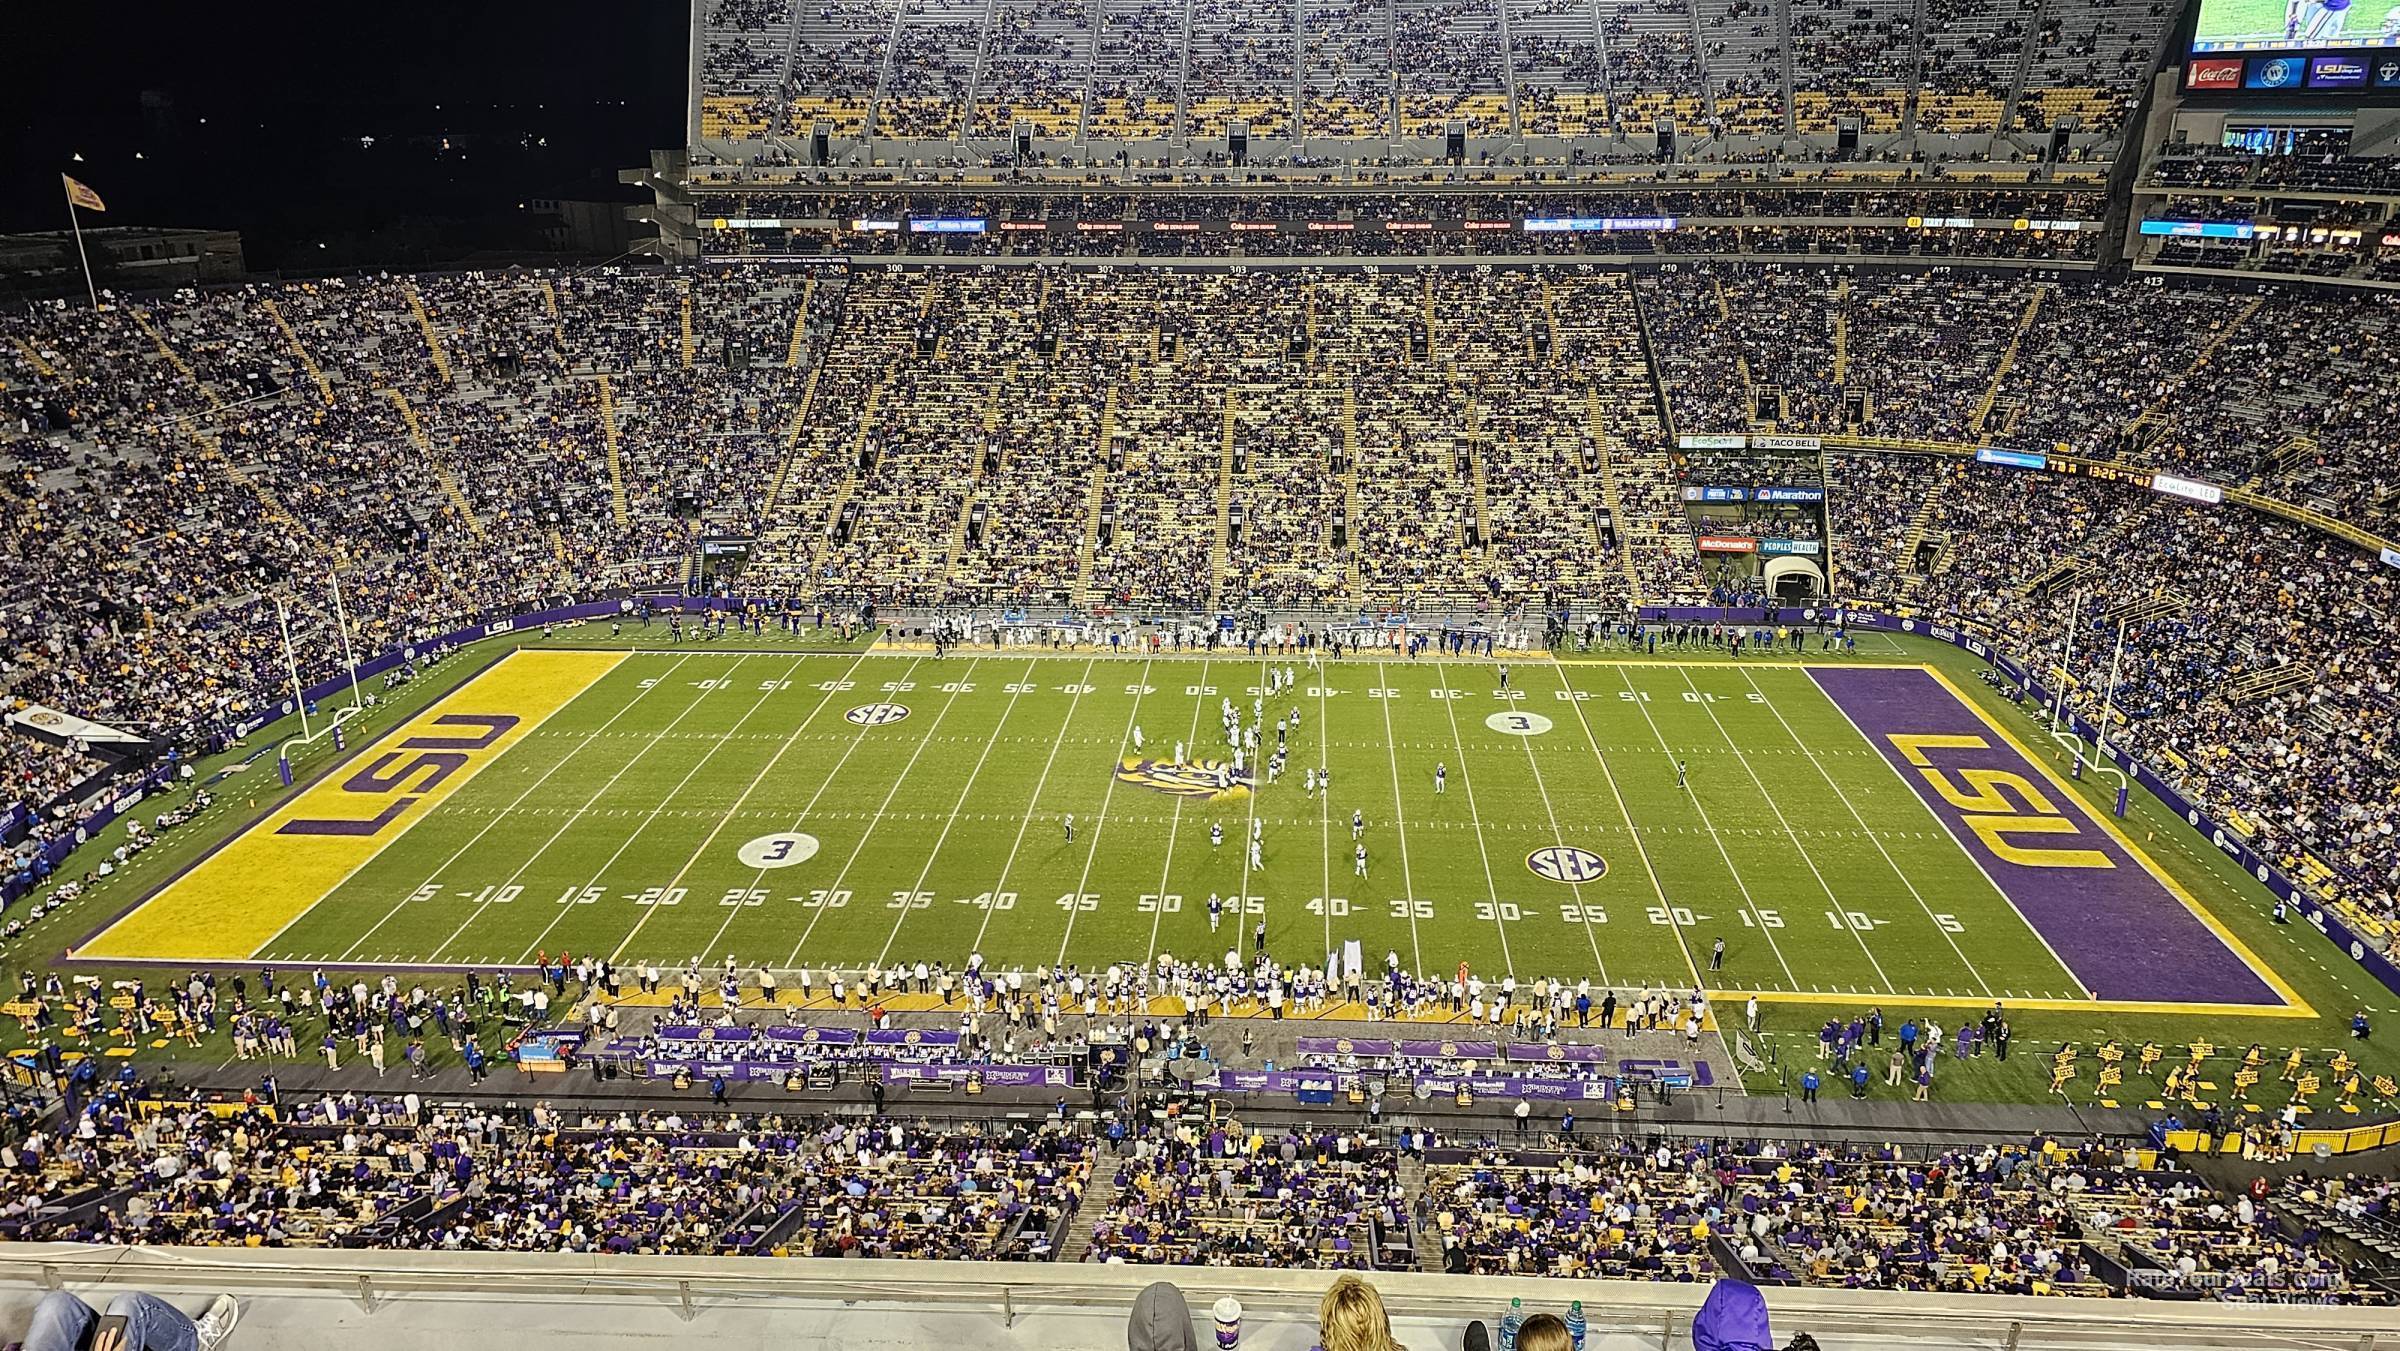 section 615, row 1 seat view  - tiger stadium